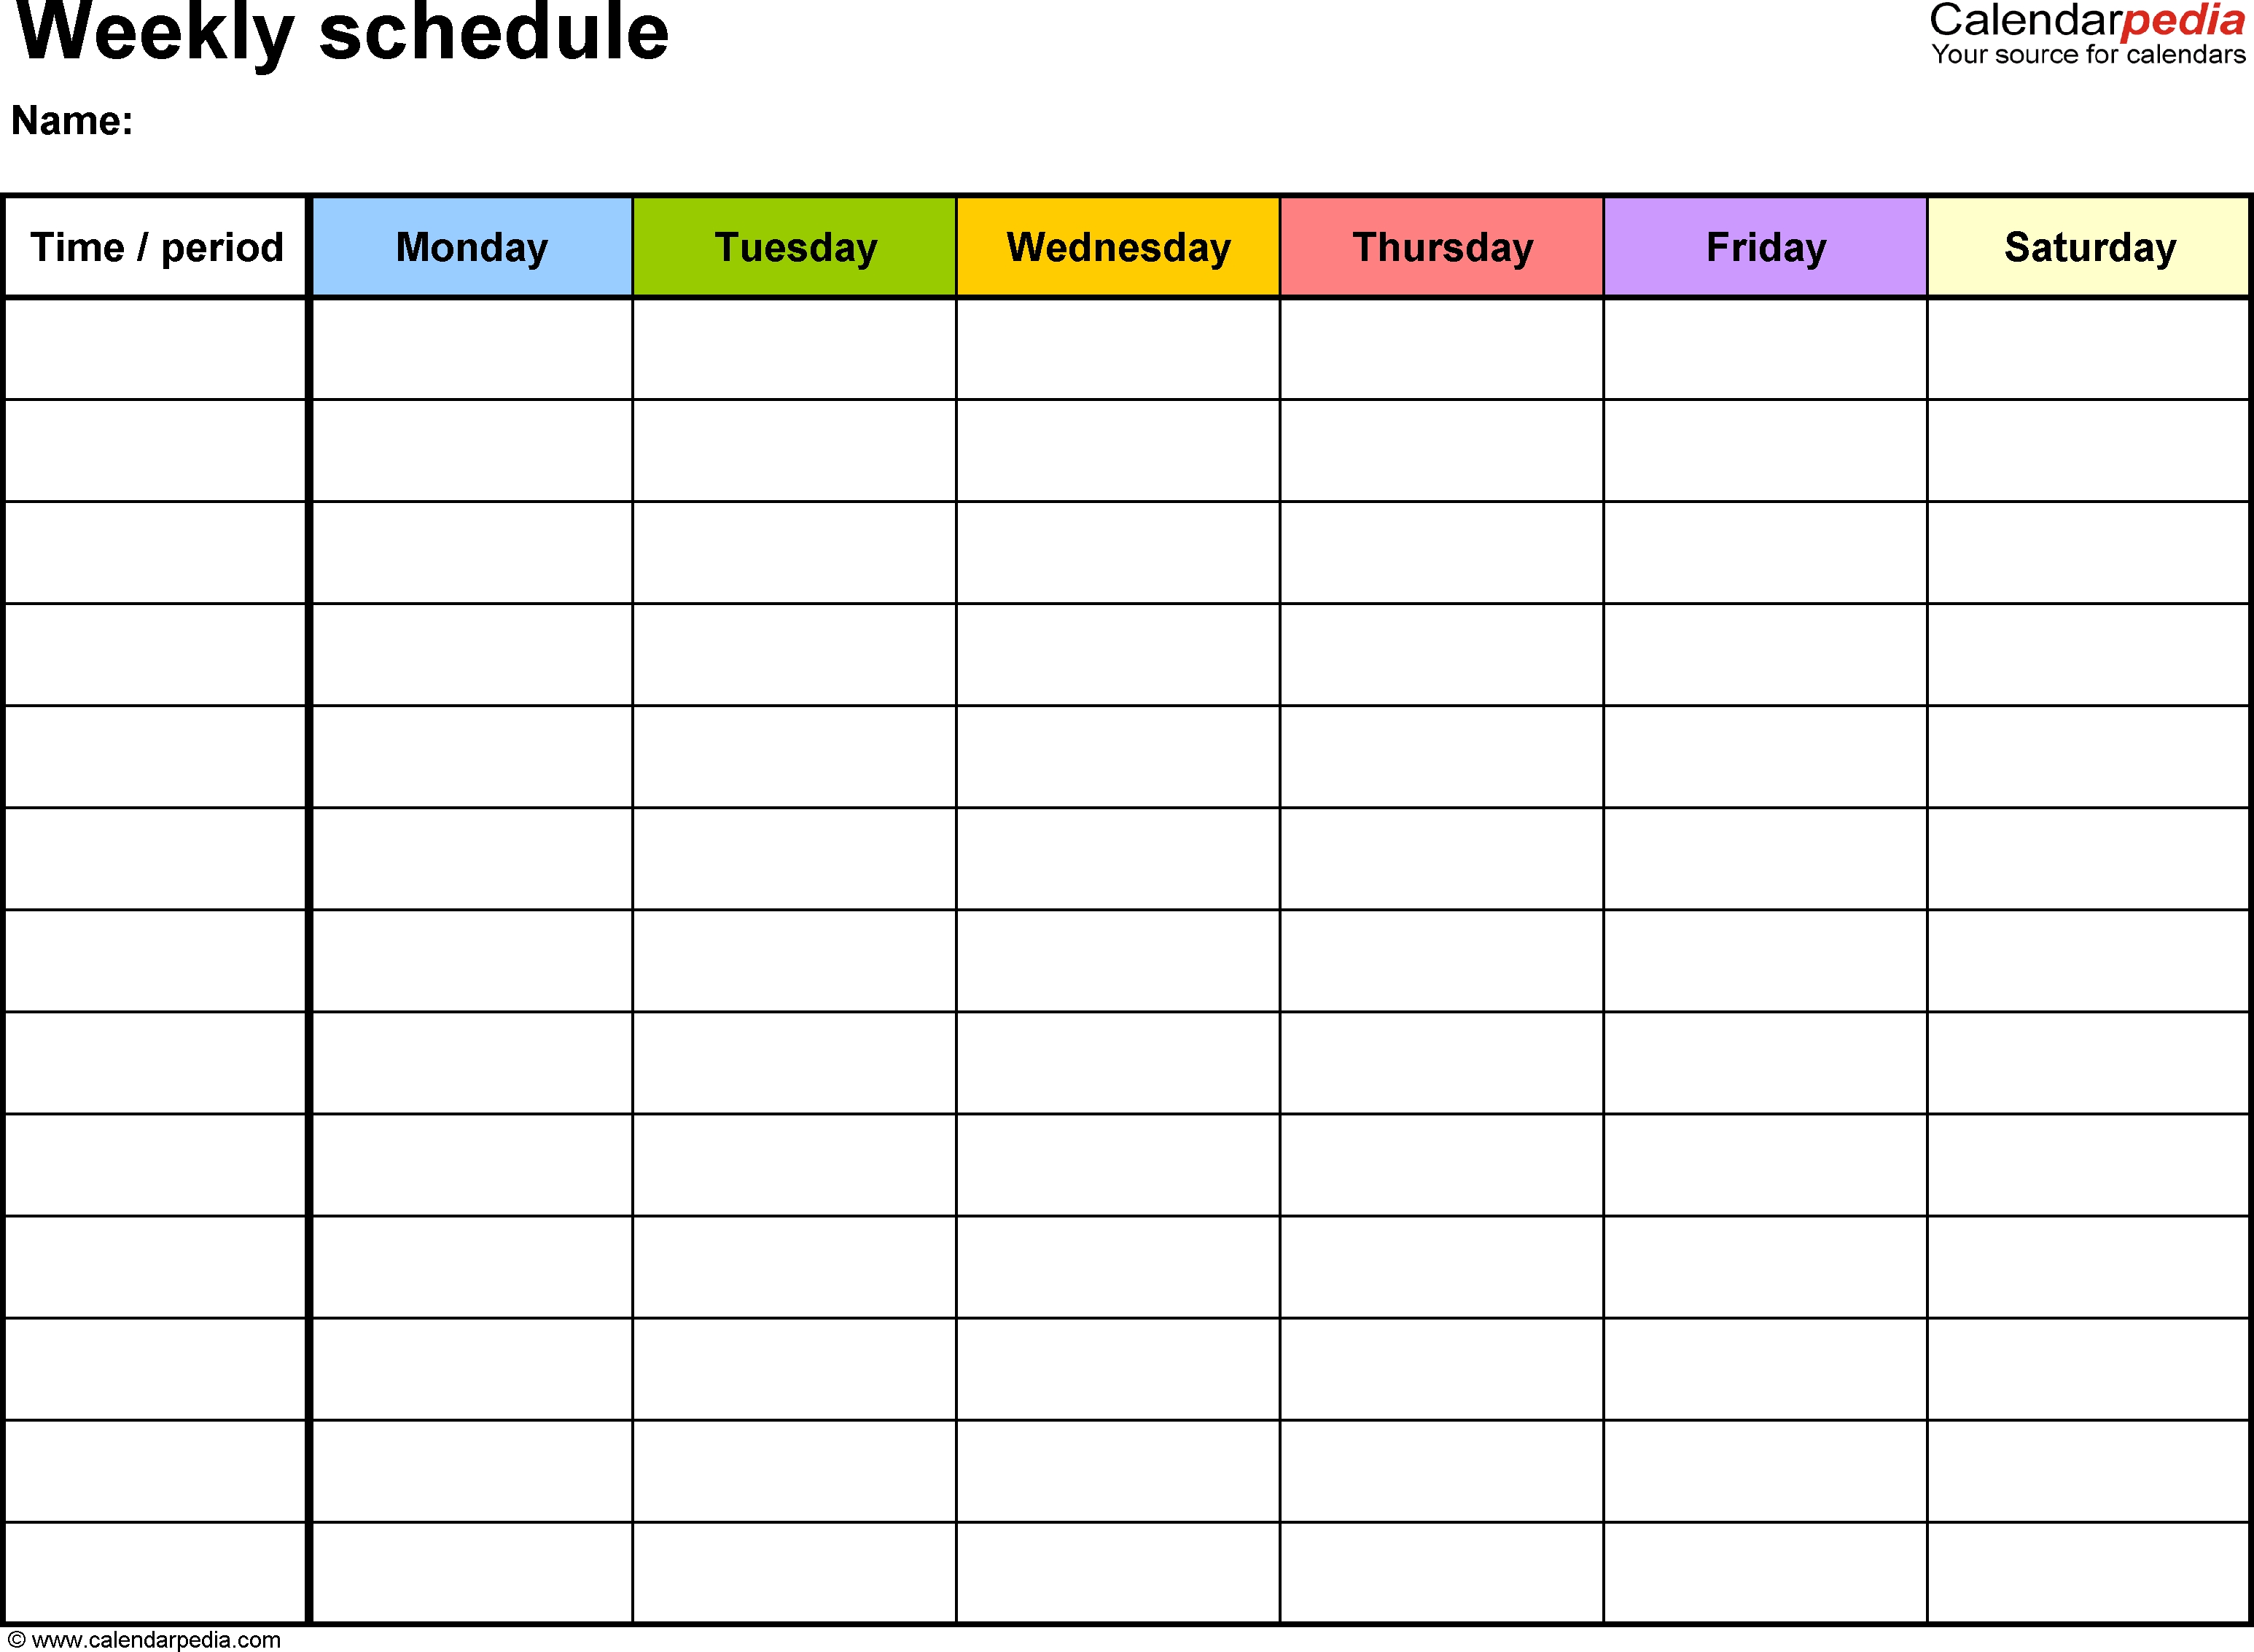 Free Weekly Schedule Templates For Word - 18 Templates Blank Monday To Friday Calendar Template